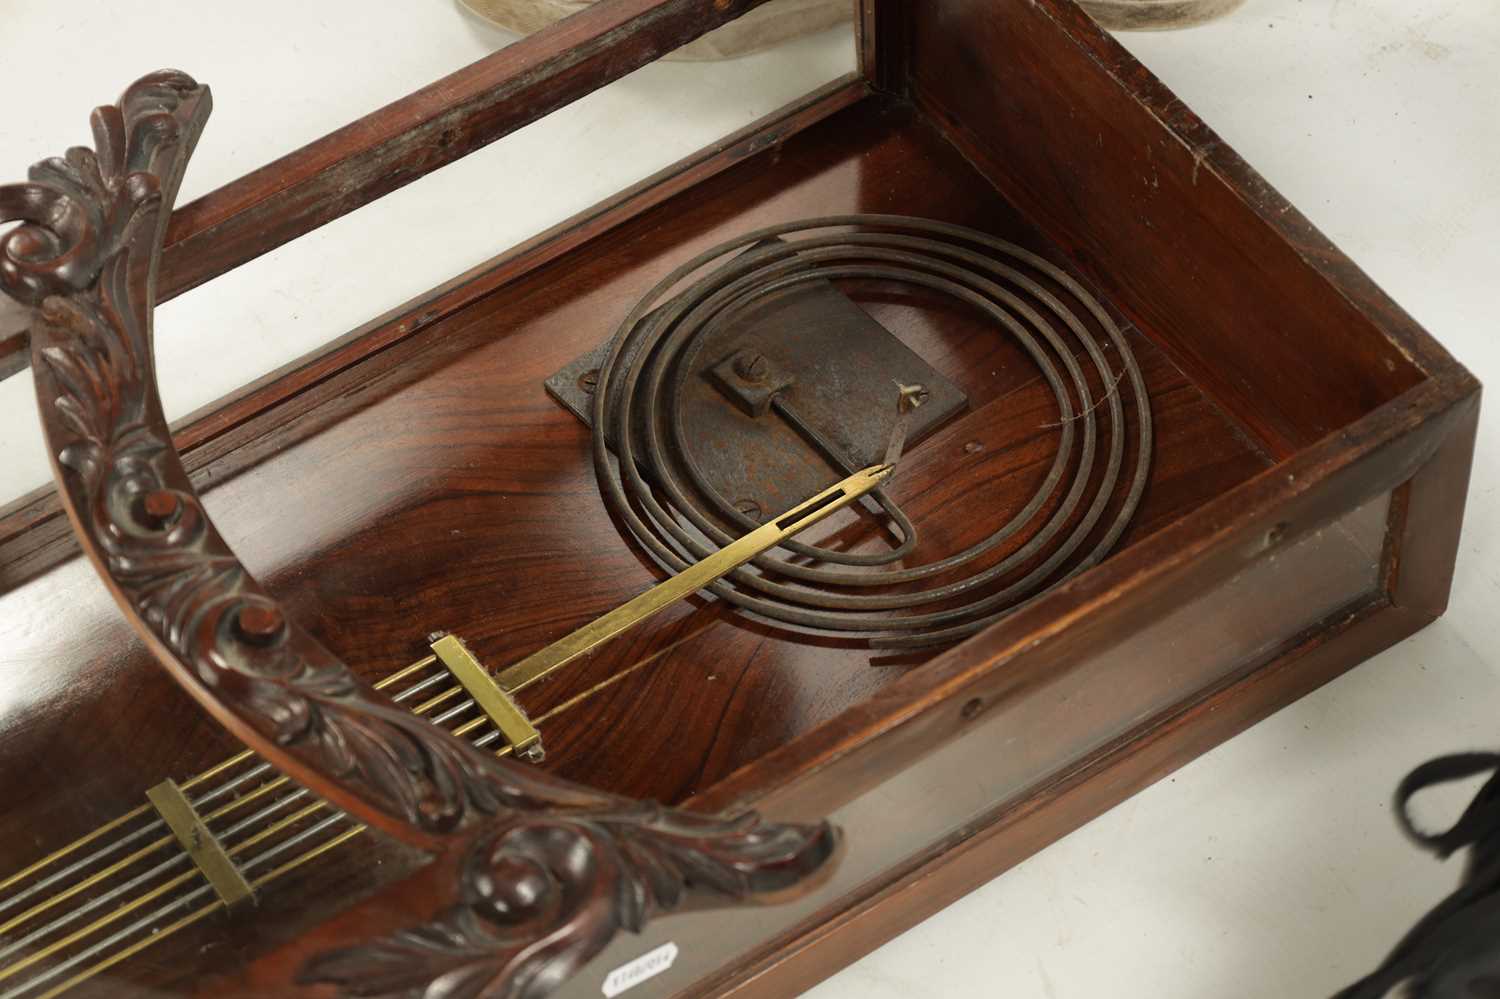 W. BROWN. LONDON. A LATE 19TH CENTURY CARVED WALNUT DOUBLE FUSEE WALL CLOCK - Image 5 of 8